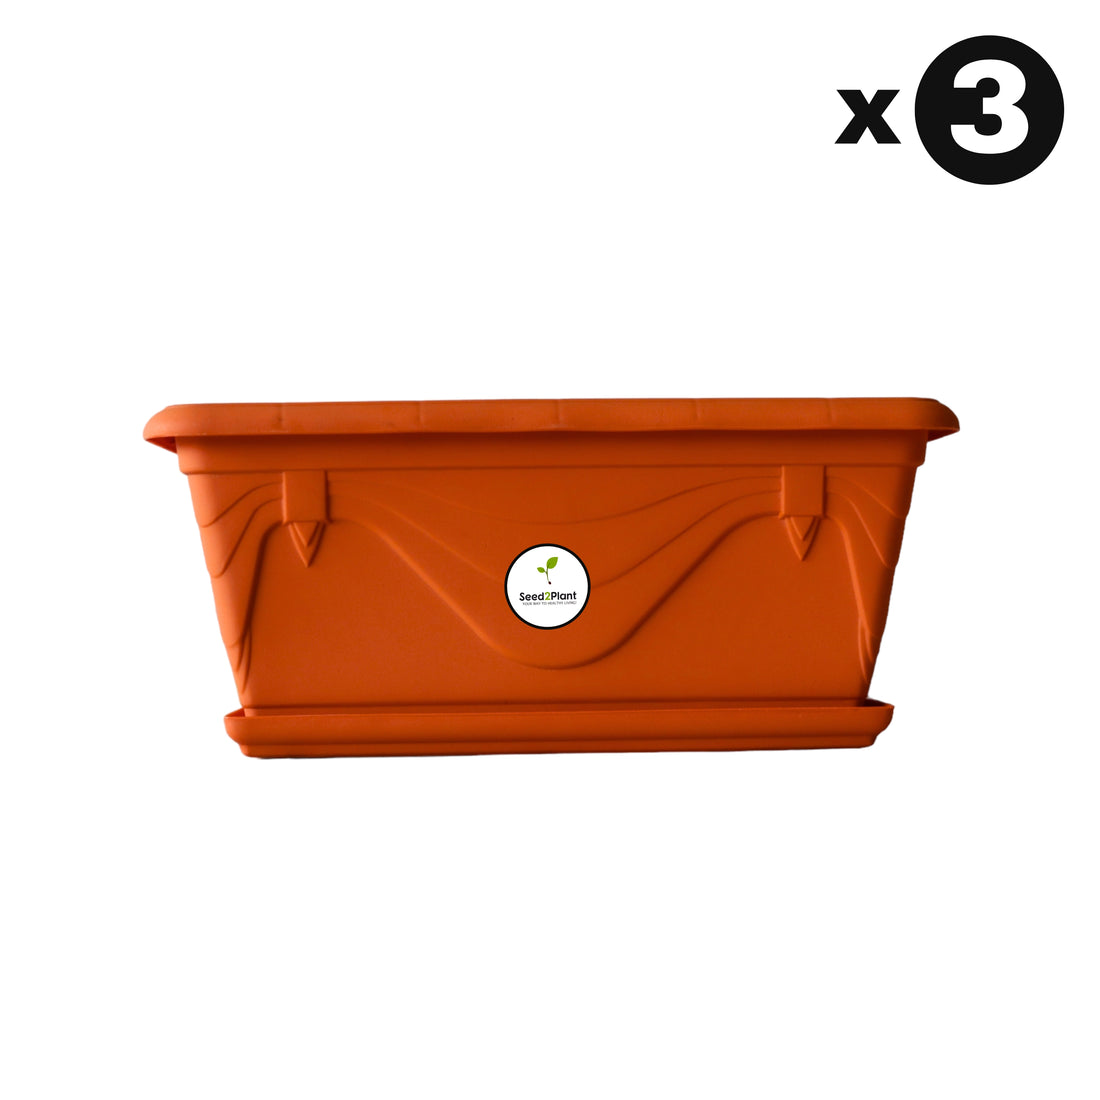 UV Treated Rectangular Plastic Planter Small with Tray - Terracotta Colour